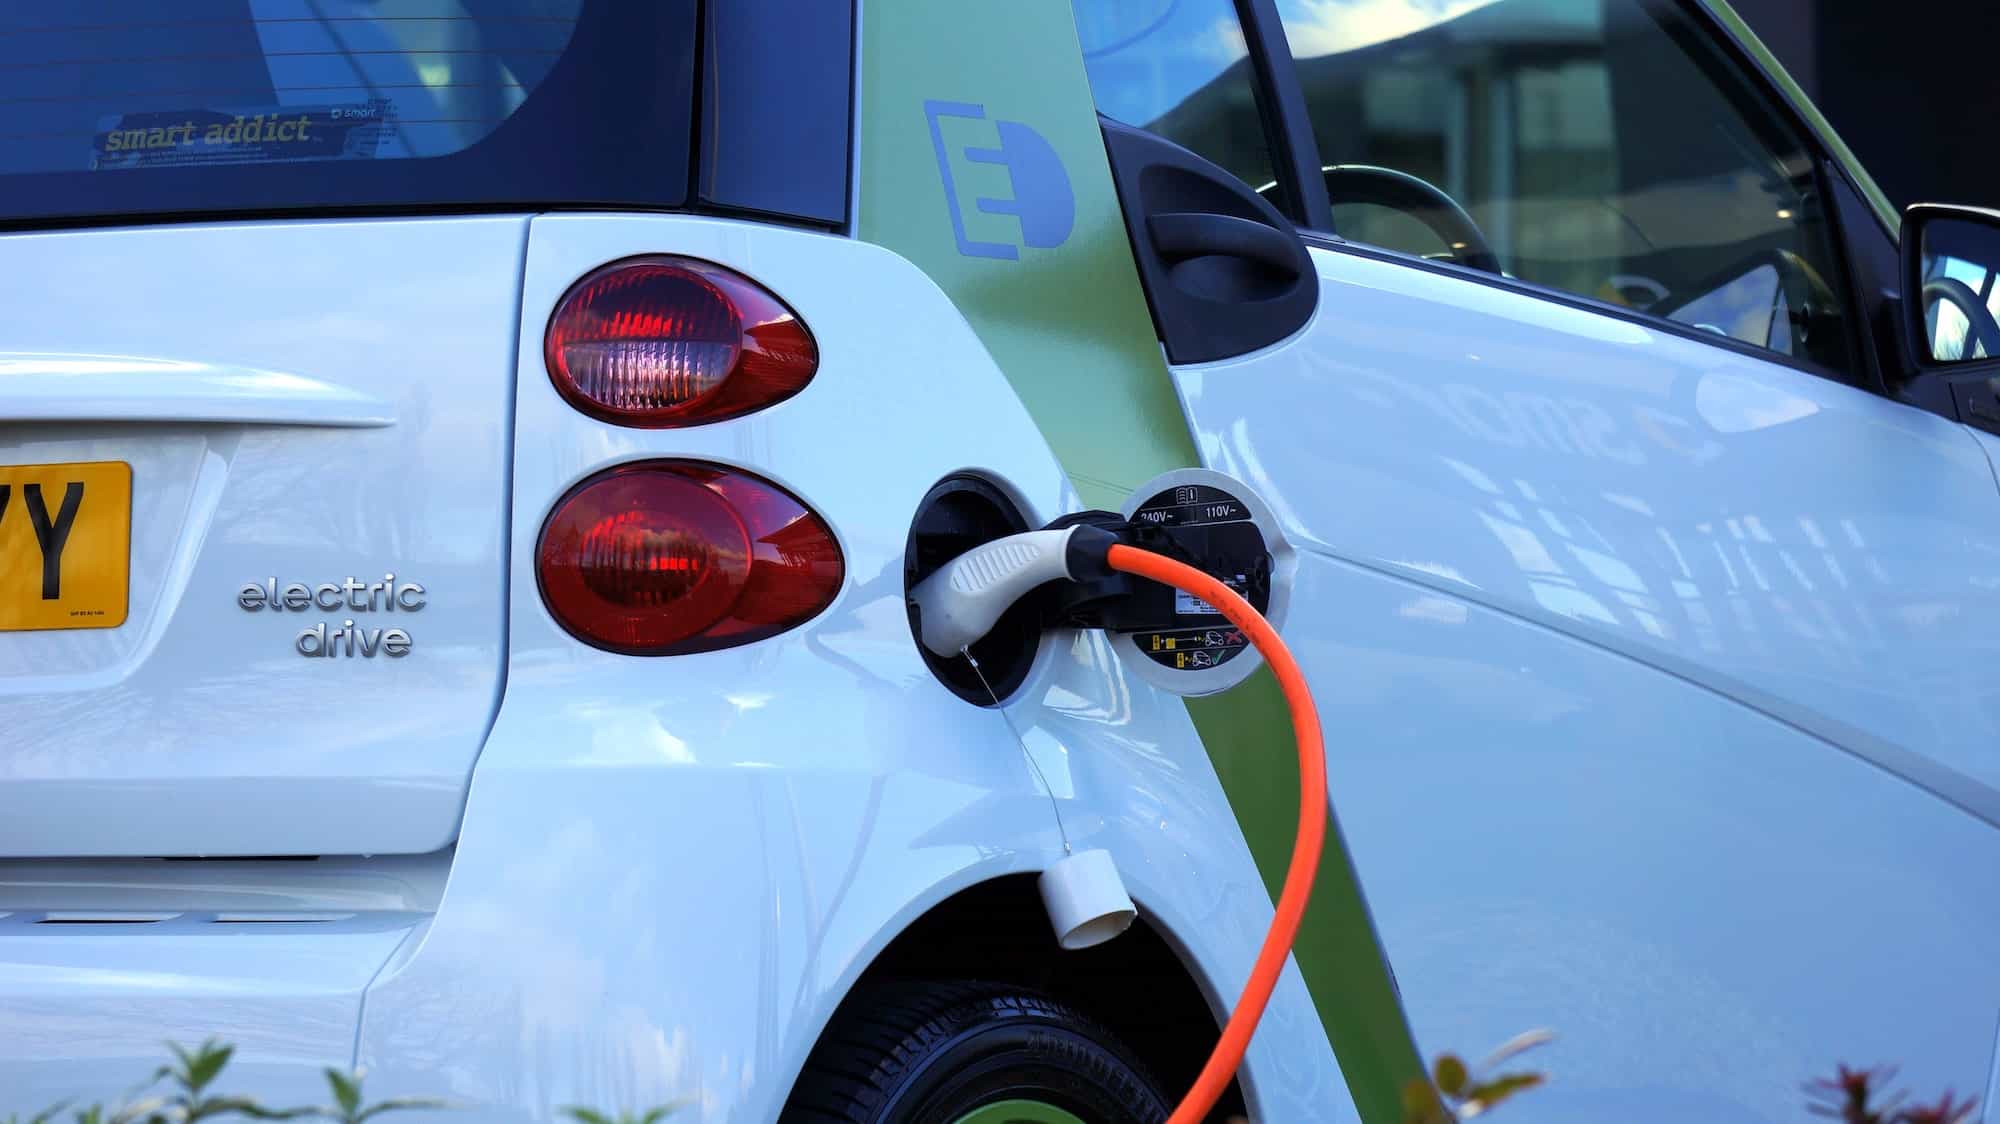 Are Electric Vehicles The Future Of The Automotive Industry?